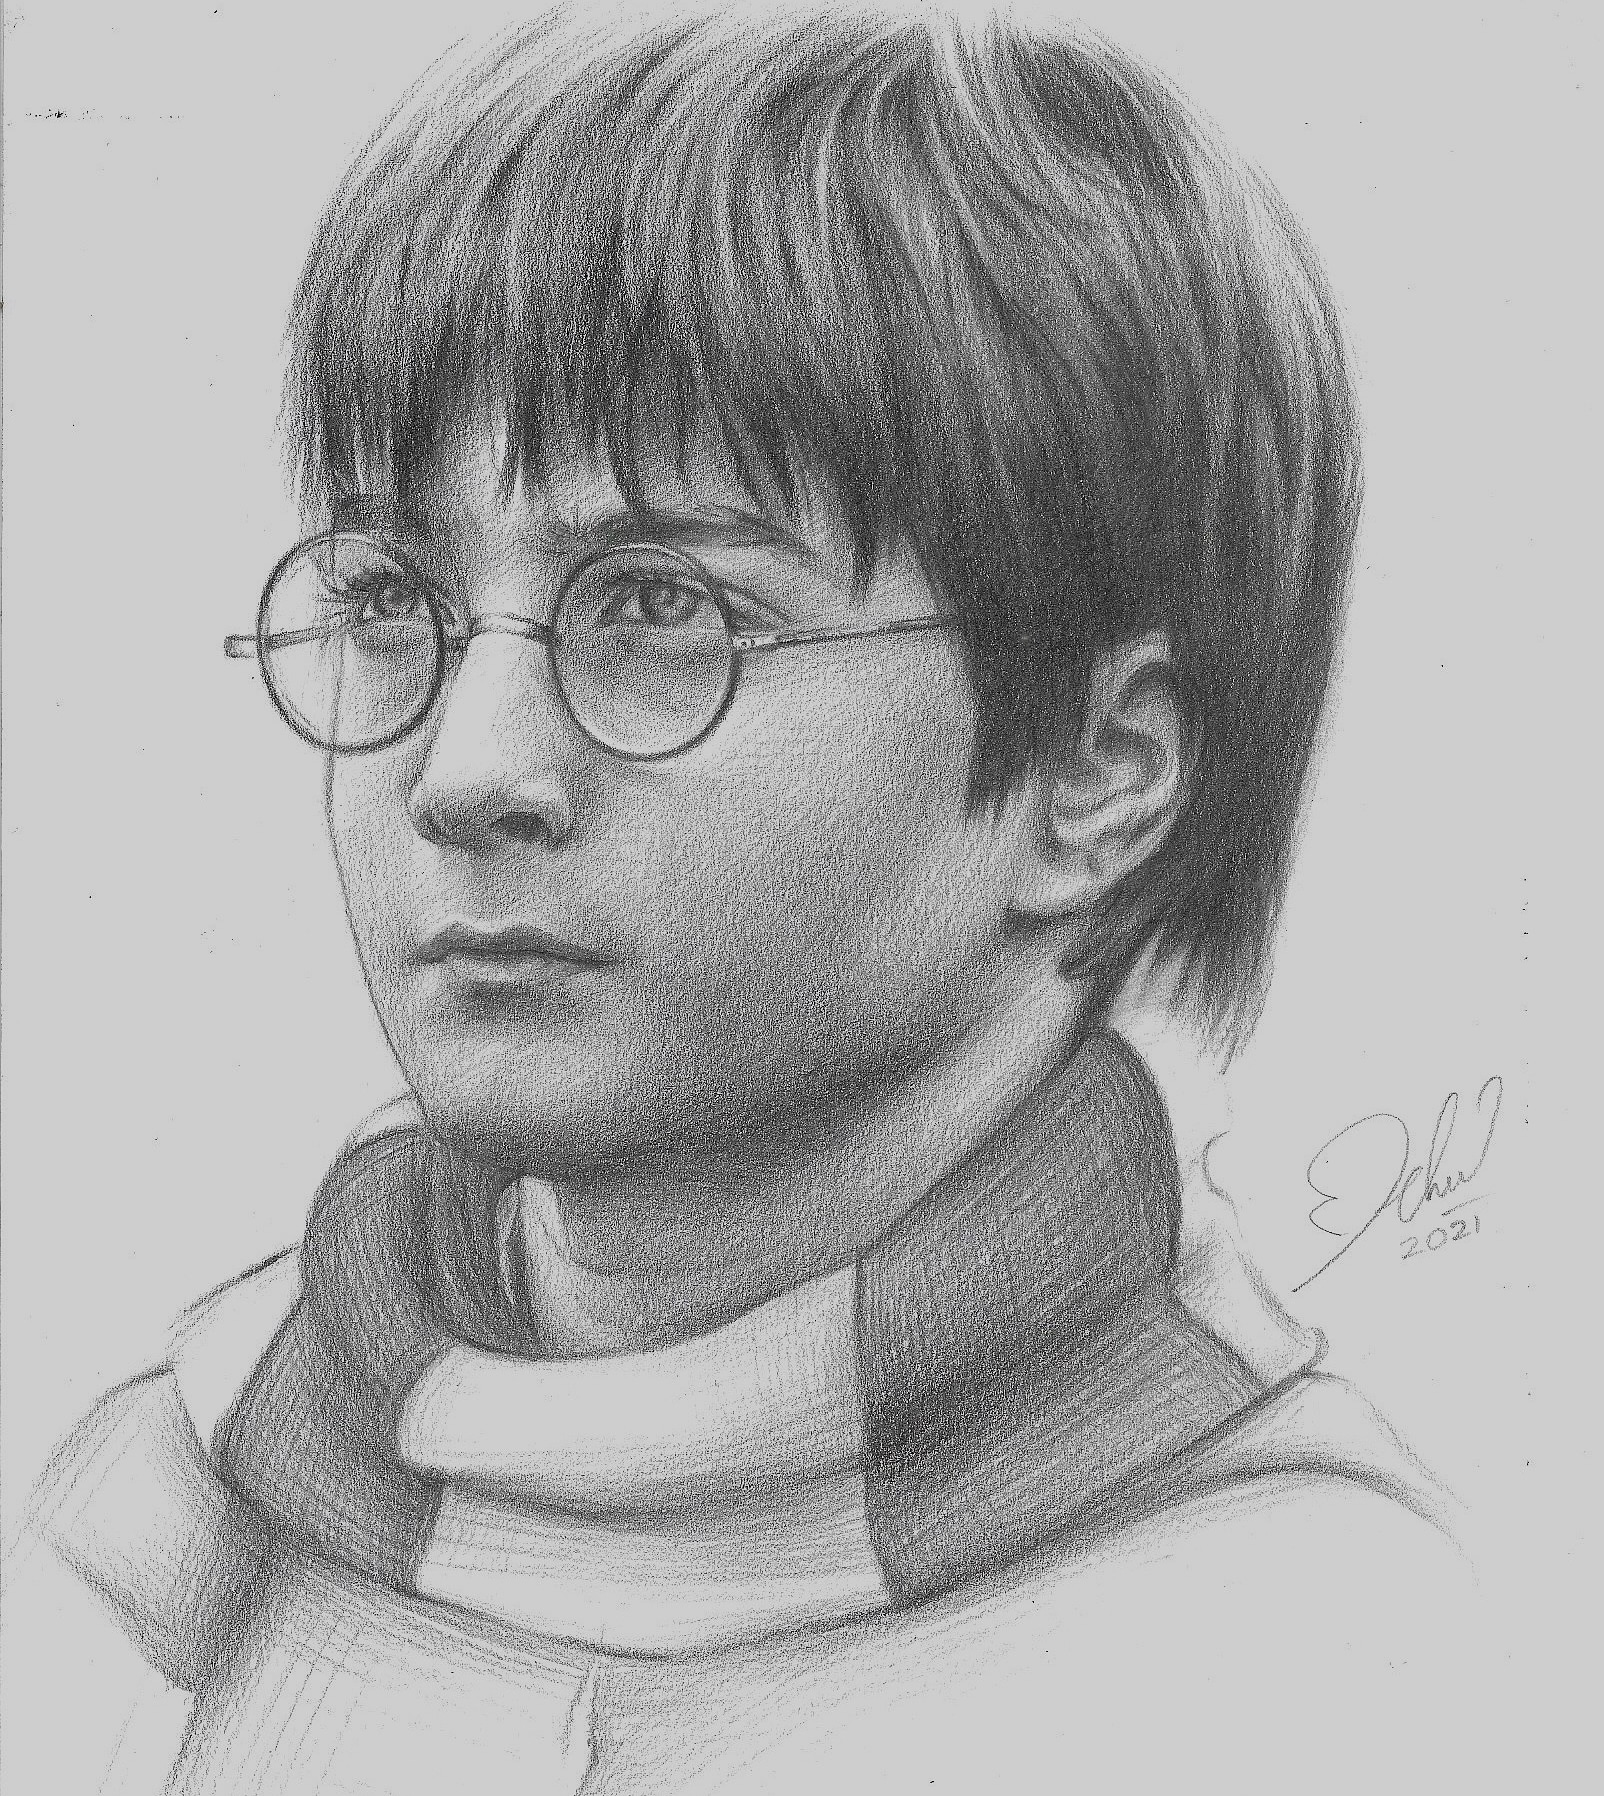 Portraits of the heroes of the story about the boy who survived - Pencil drawing, Harry Potter, Hagrid, Professor Grum, Severus Snape, Sirius Black, Luna Lovegood, Ron Weasley, Voldemort, Draco Malfoy, Hermione, Characters (edit), Longpost